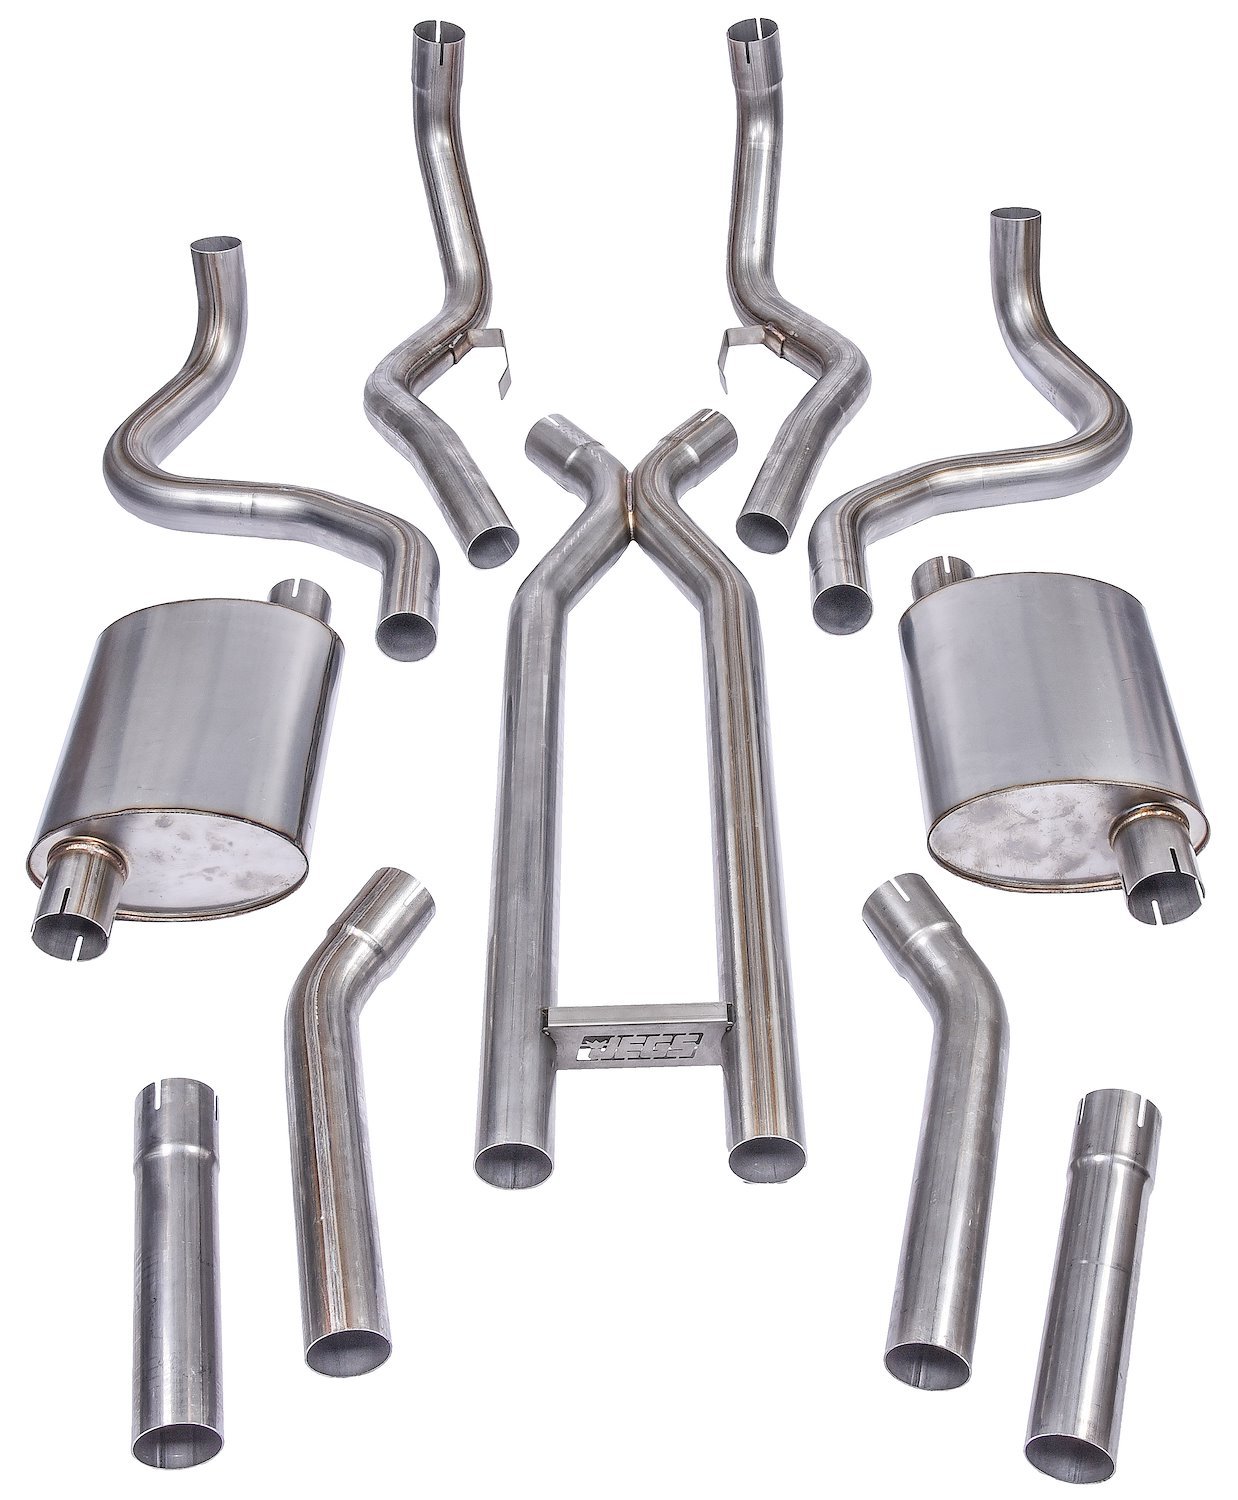 Header-Back Dual 3 in. Exhaust Kit 409 Stainless Steel